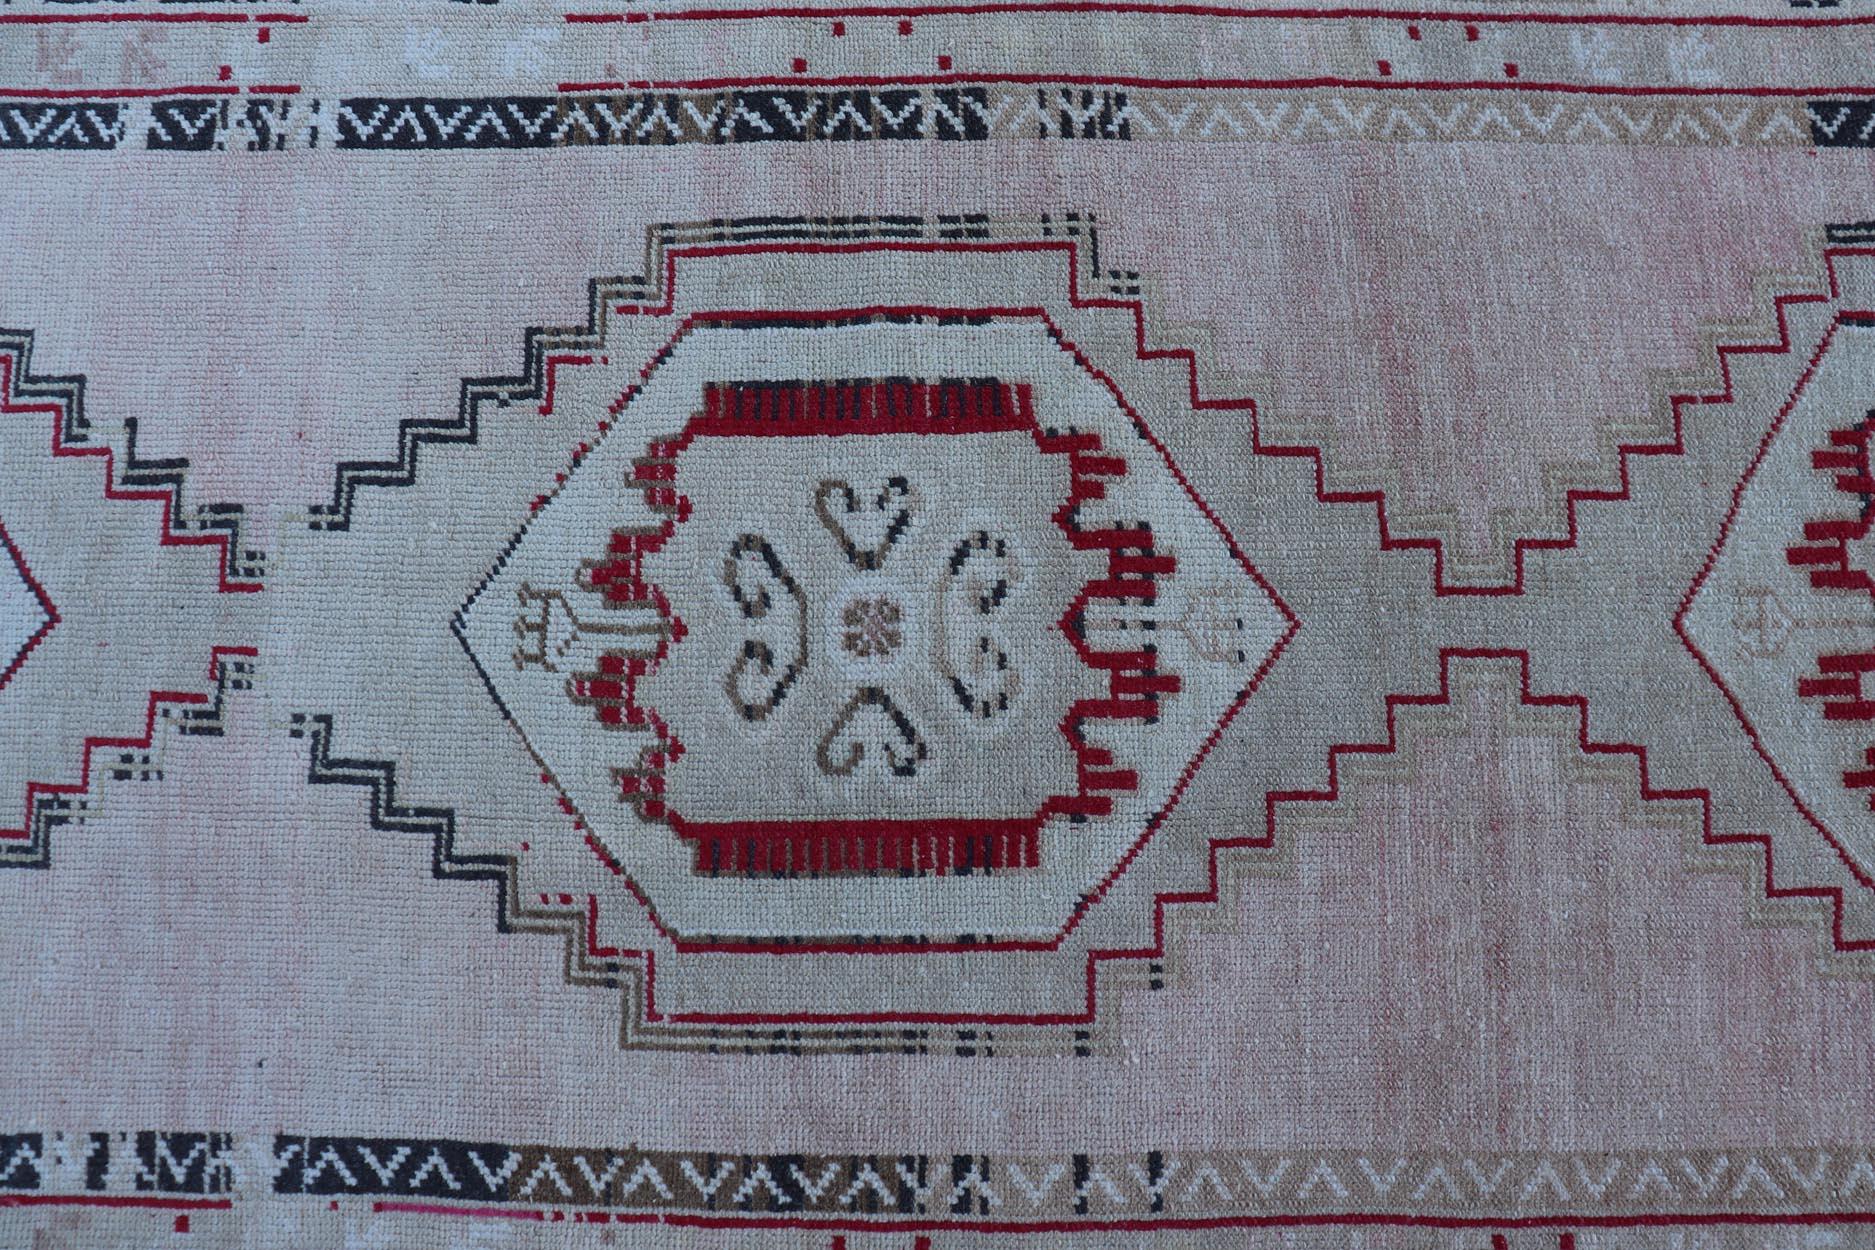 Vintage Turkish Oushak Runner with Medallions in Cream, dark blue, pink and Red. Rug EN-178468, country of origin / type: Turkey / Oushak, circa 1940.

Measures: 3'7 x 10'6
 
This unique vintage Turkish Oushak runner features stylized medallions